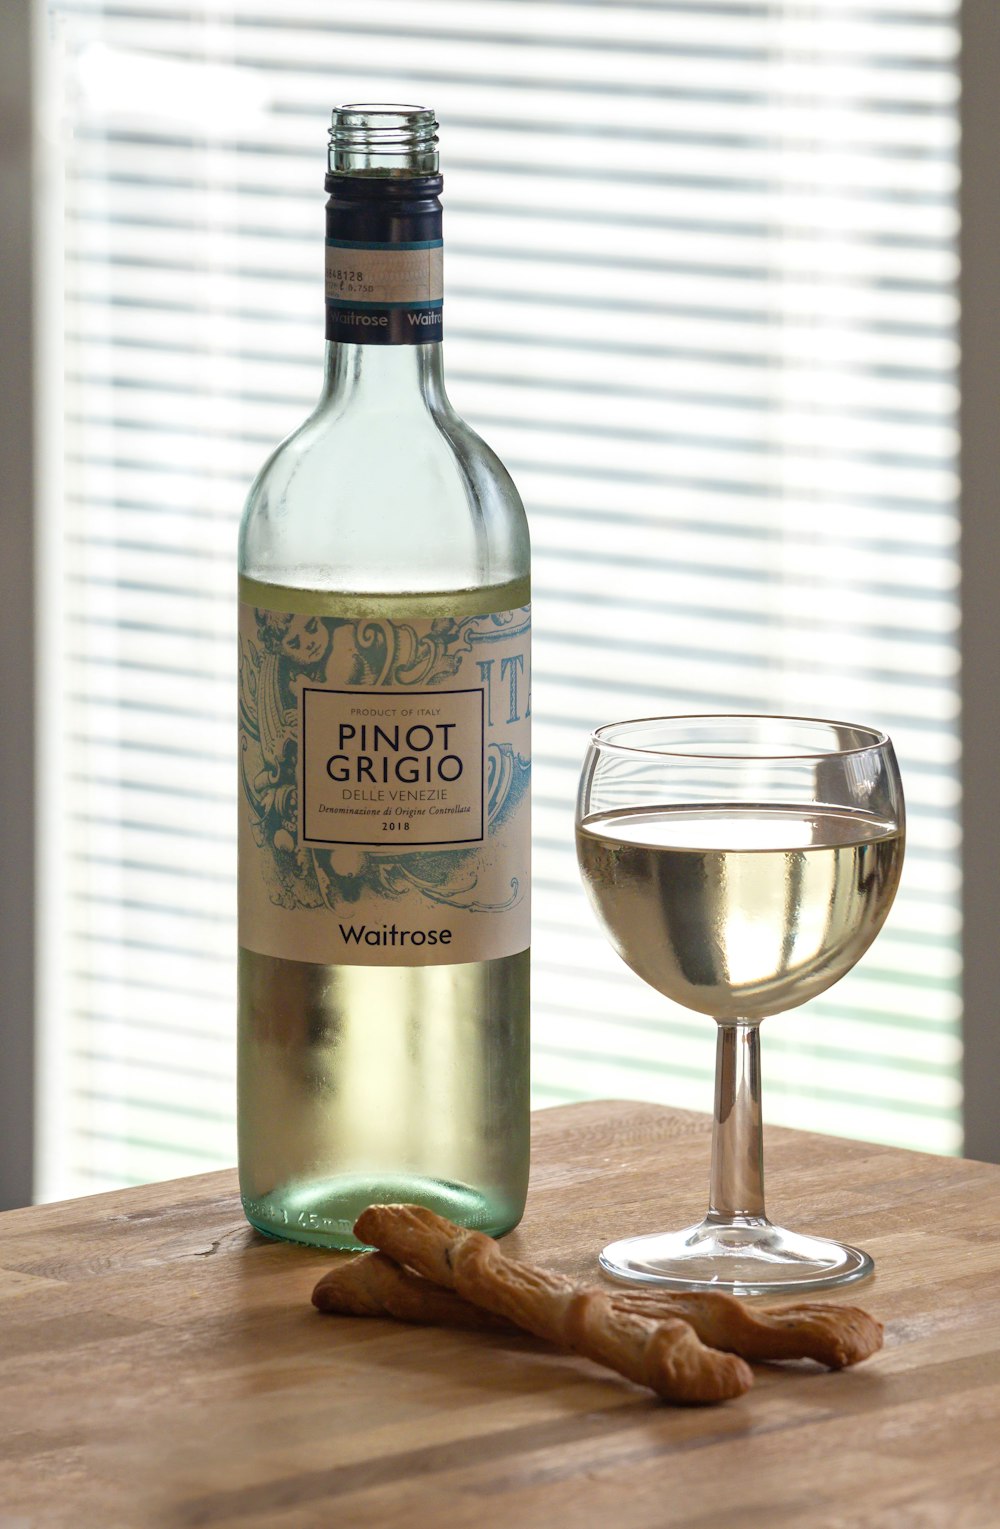 Waitrose pinot grigio near glass of wine and bread on a wooden table